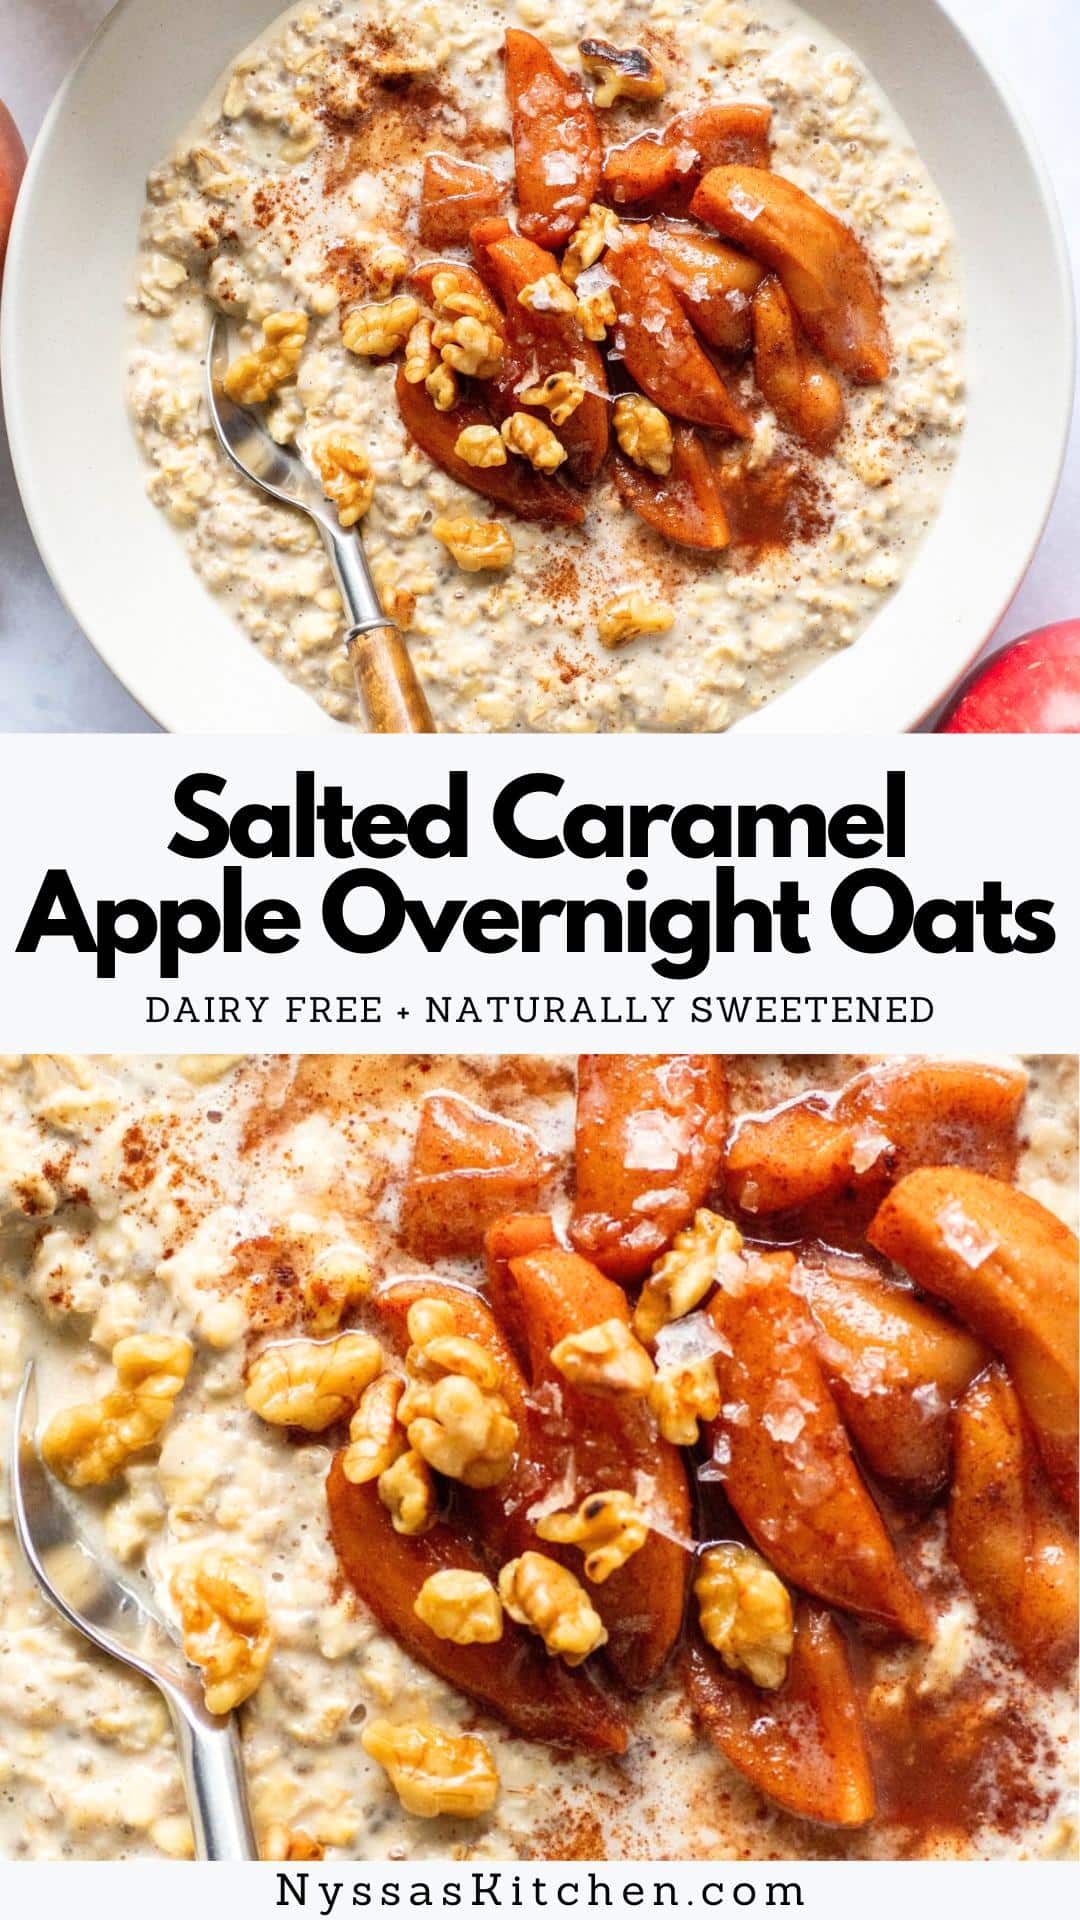 These salted caramel apple overnight oats are a delicious and healthy breakfast recipe that is dairy free, naturally sweetened, and gluten free! Made with mouthwatering baked cinnamon apples, gluten free oats, non dairy milk, cinnamon and vanilla. A breakfast so yummy you're sure to fall in love.